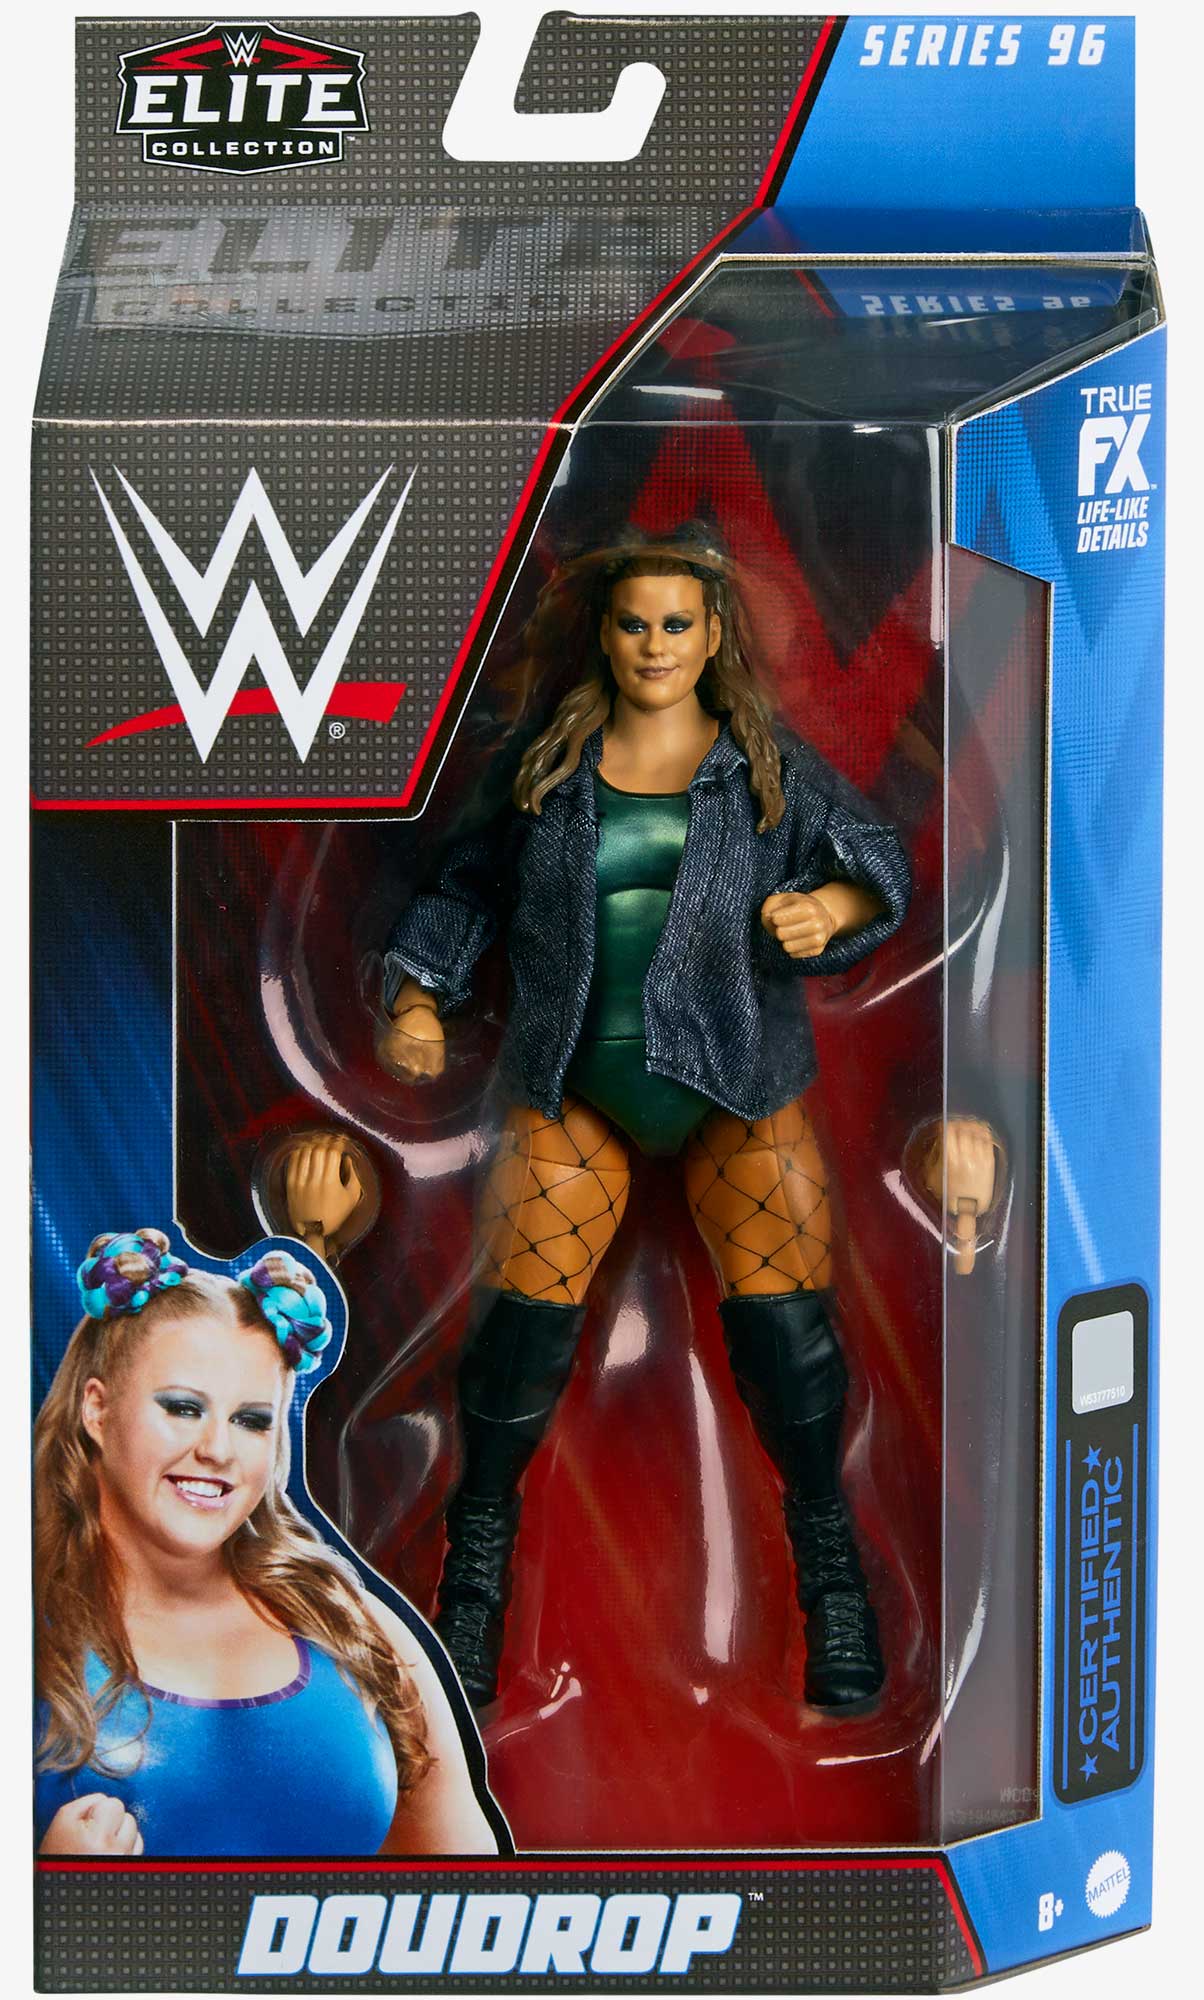 Doudrop WWE Elite Collection Series #96 (Chase Variant)